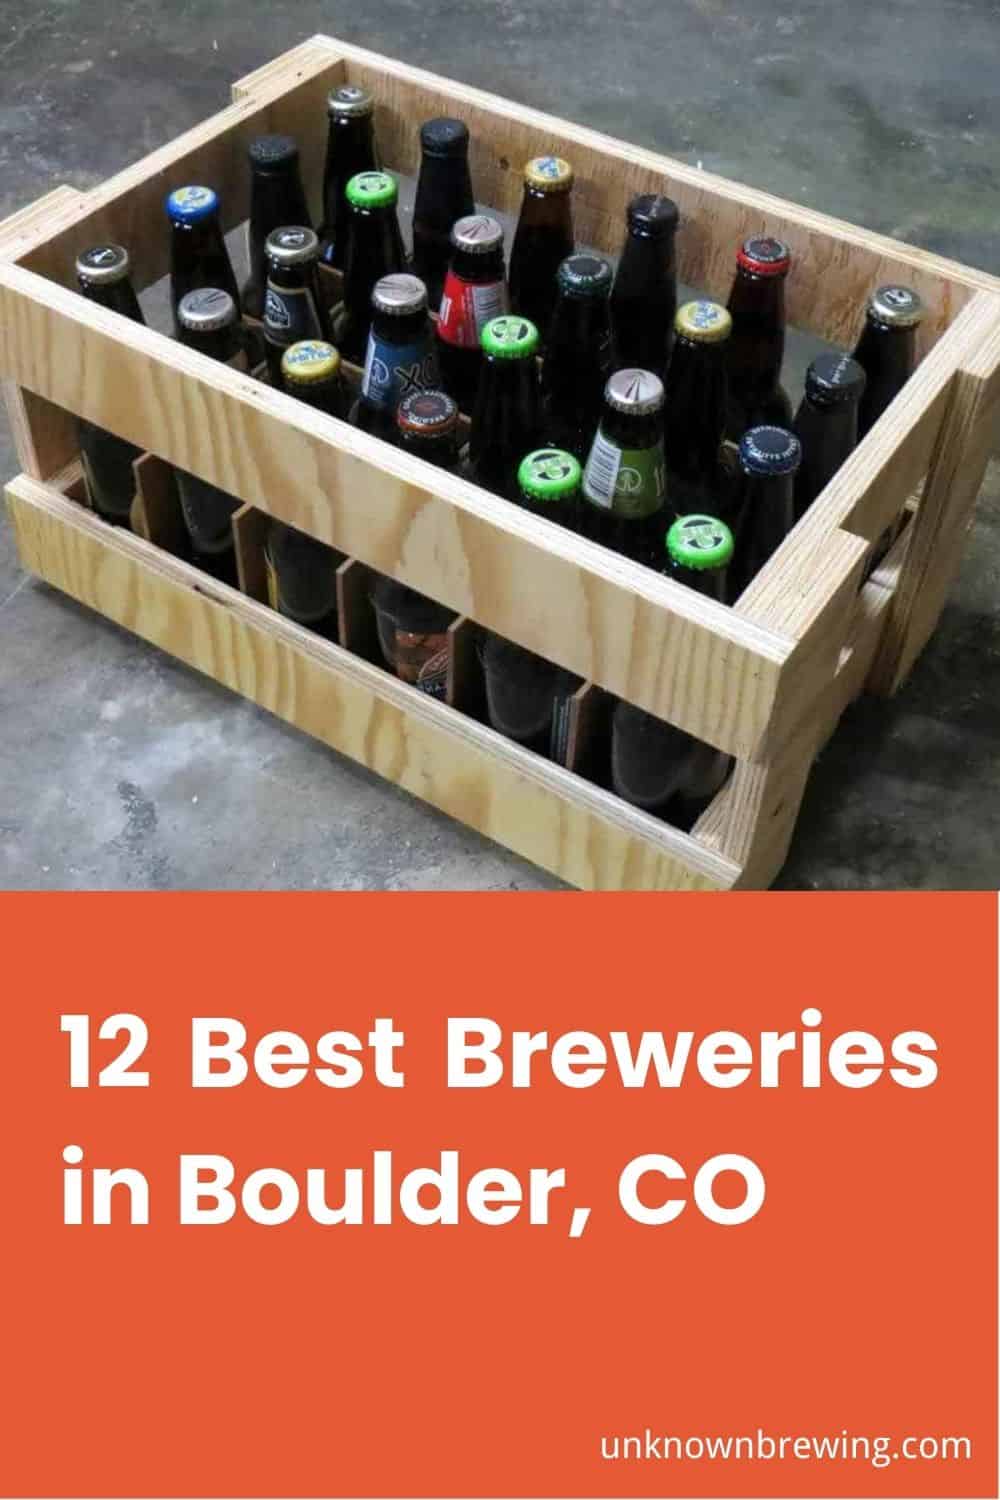 Breweries in Boulder, CO